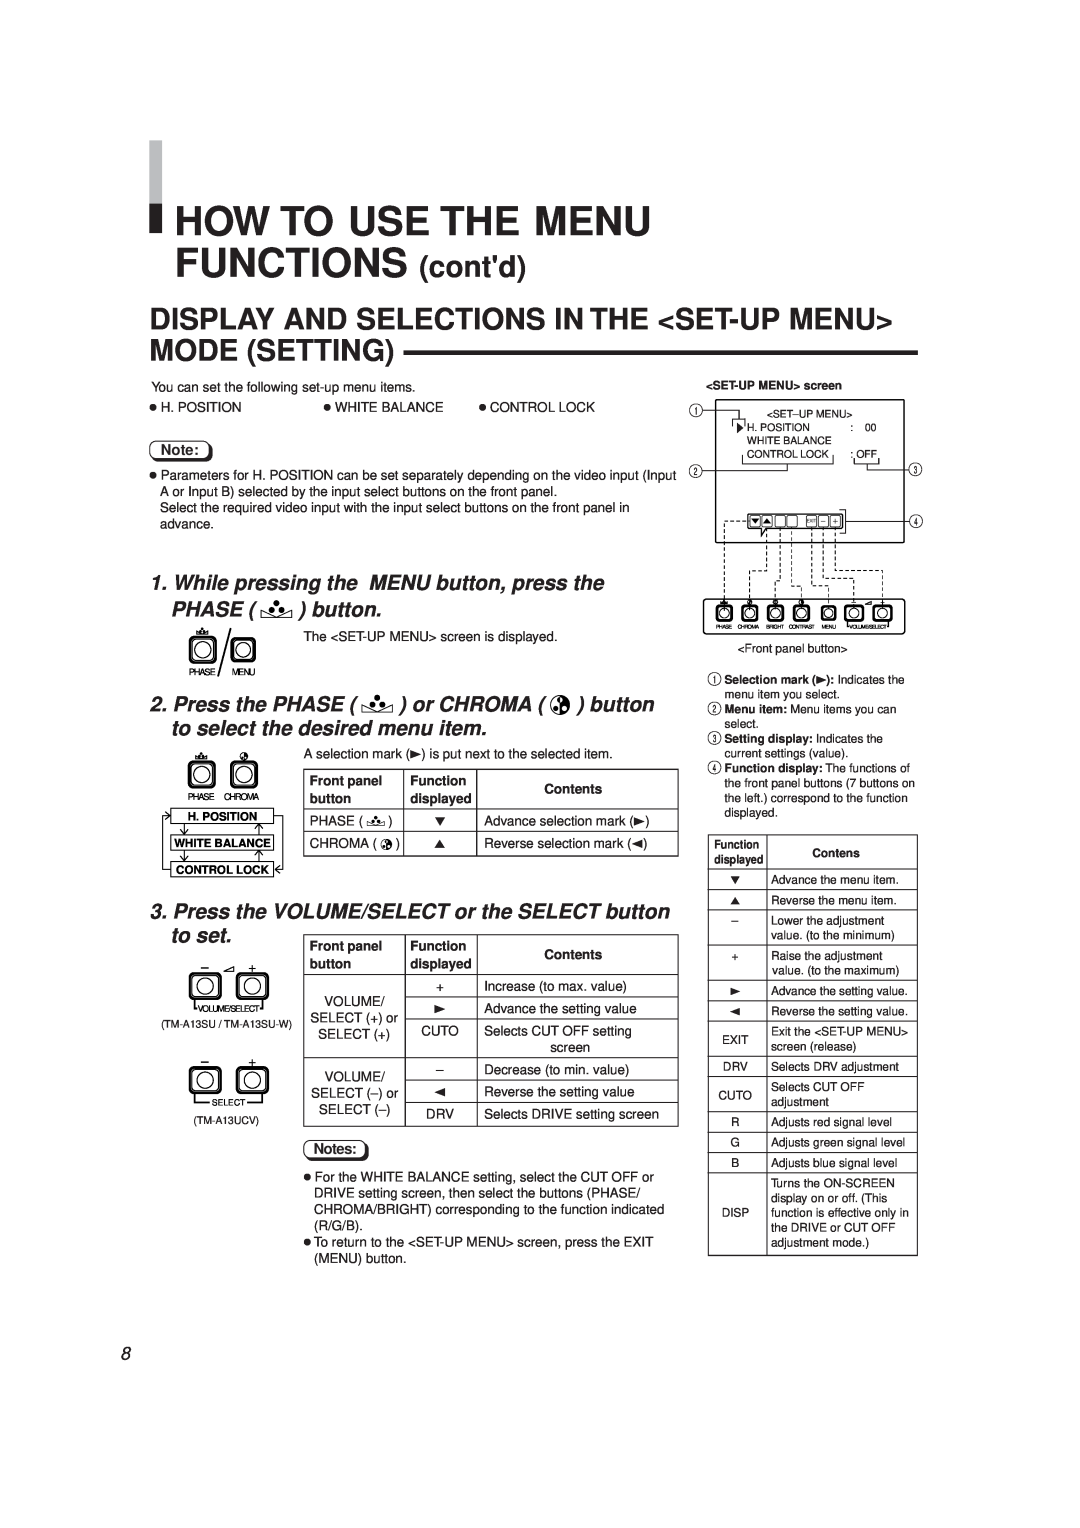 JVC TM-A13SU manual HOW TO USE THE MENU FUNCTIONS contd, Display And Selections In The Set-Up Menu Mode Setting, to set 